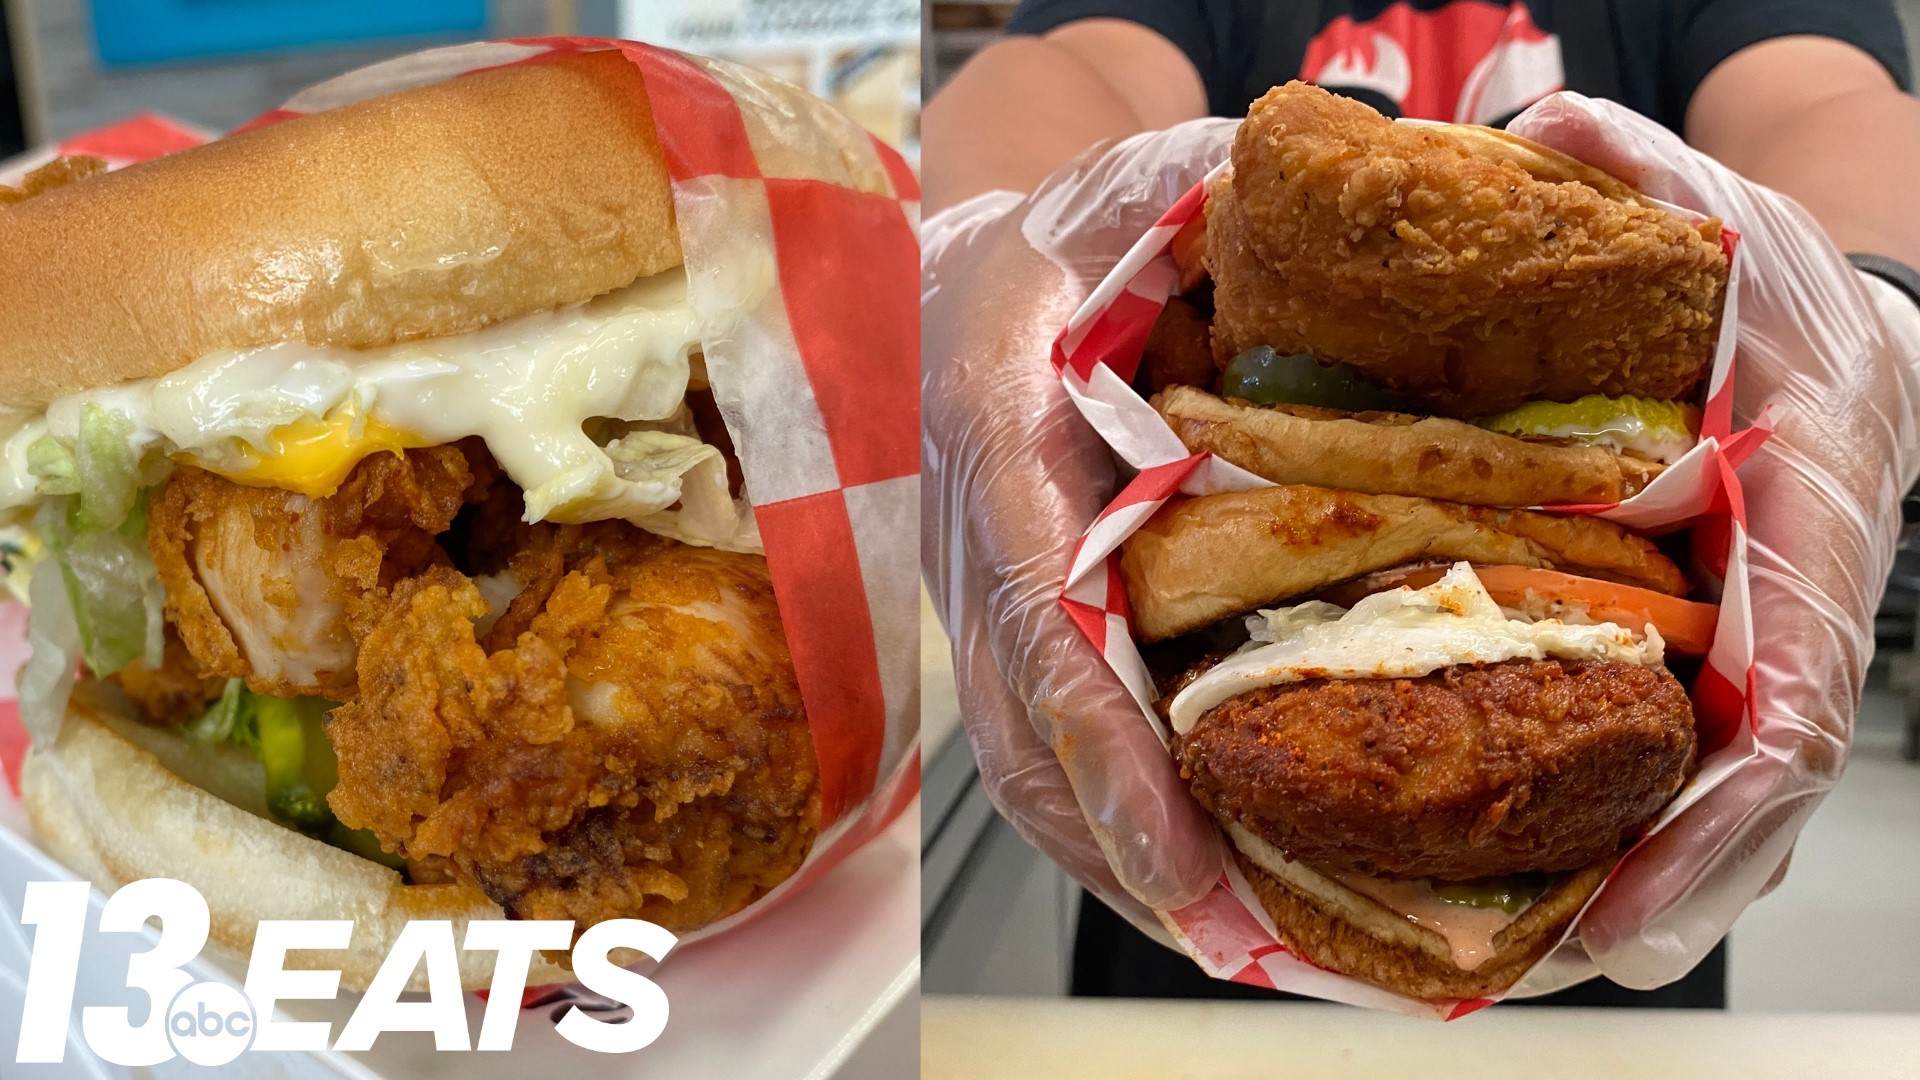 This week in 13 Eats, we put two Grand Rapids fried chicken sandwich hotspots head-to-head to see which came out on top.